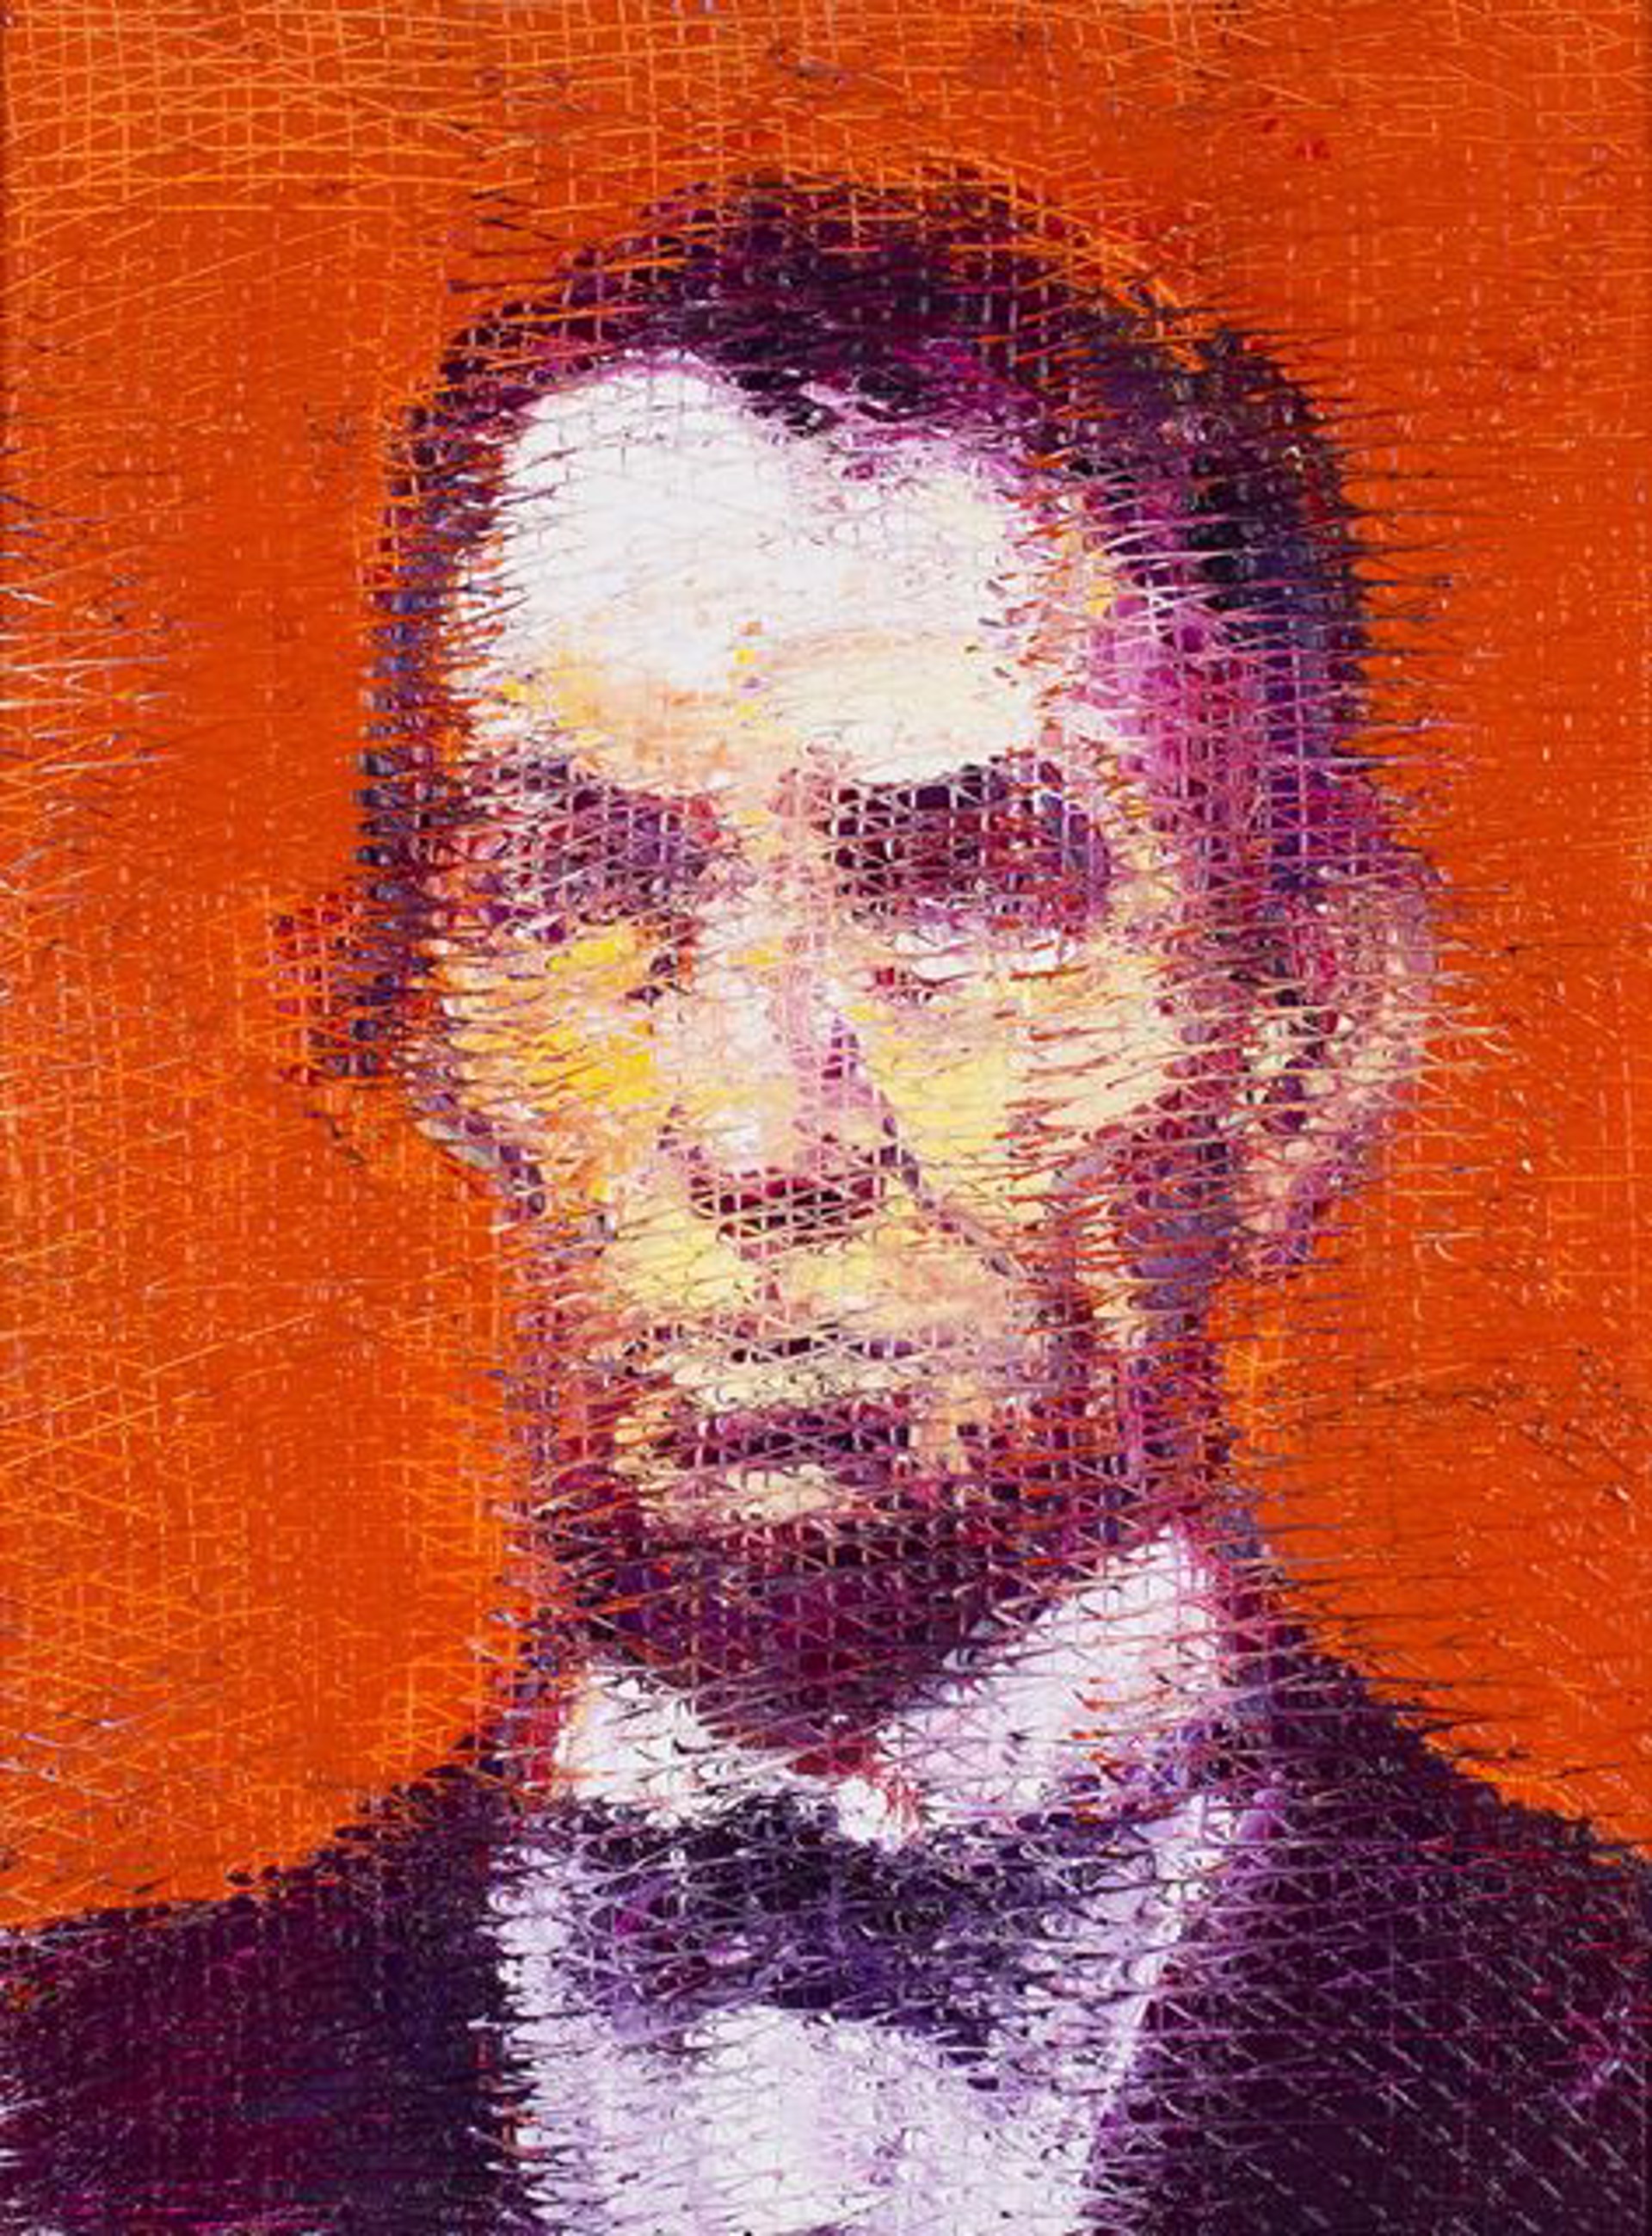 Untitled (orange and purple lincoln) by Hunt Slonem